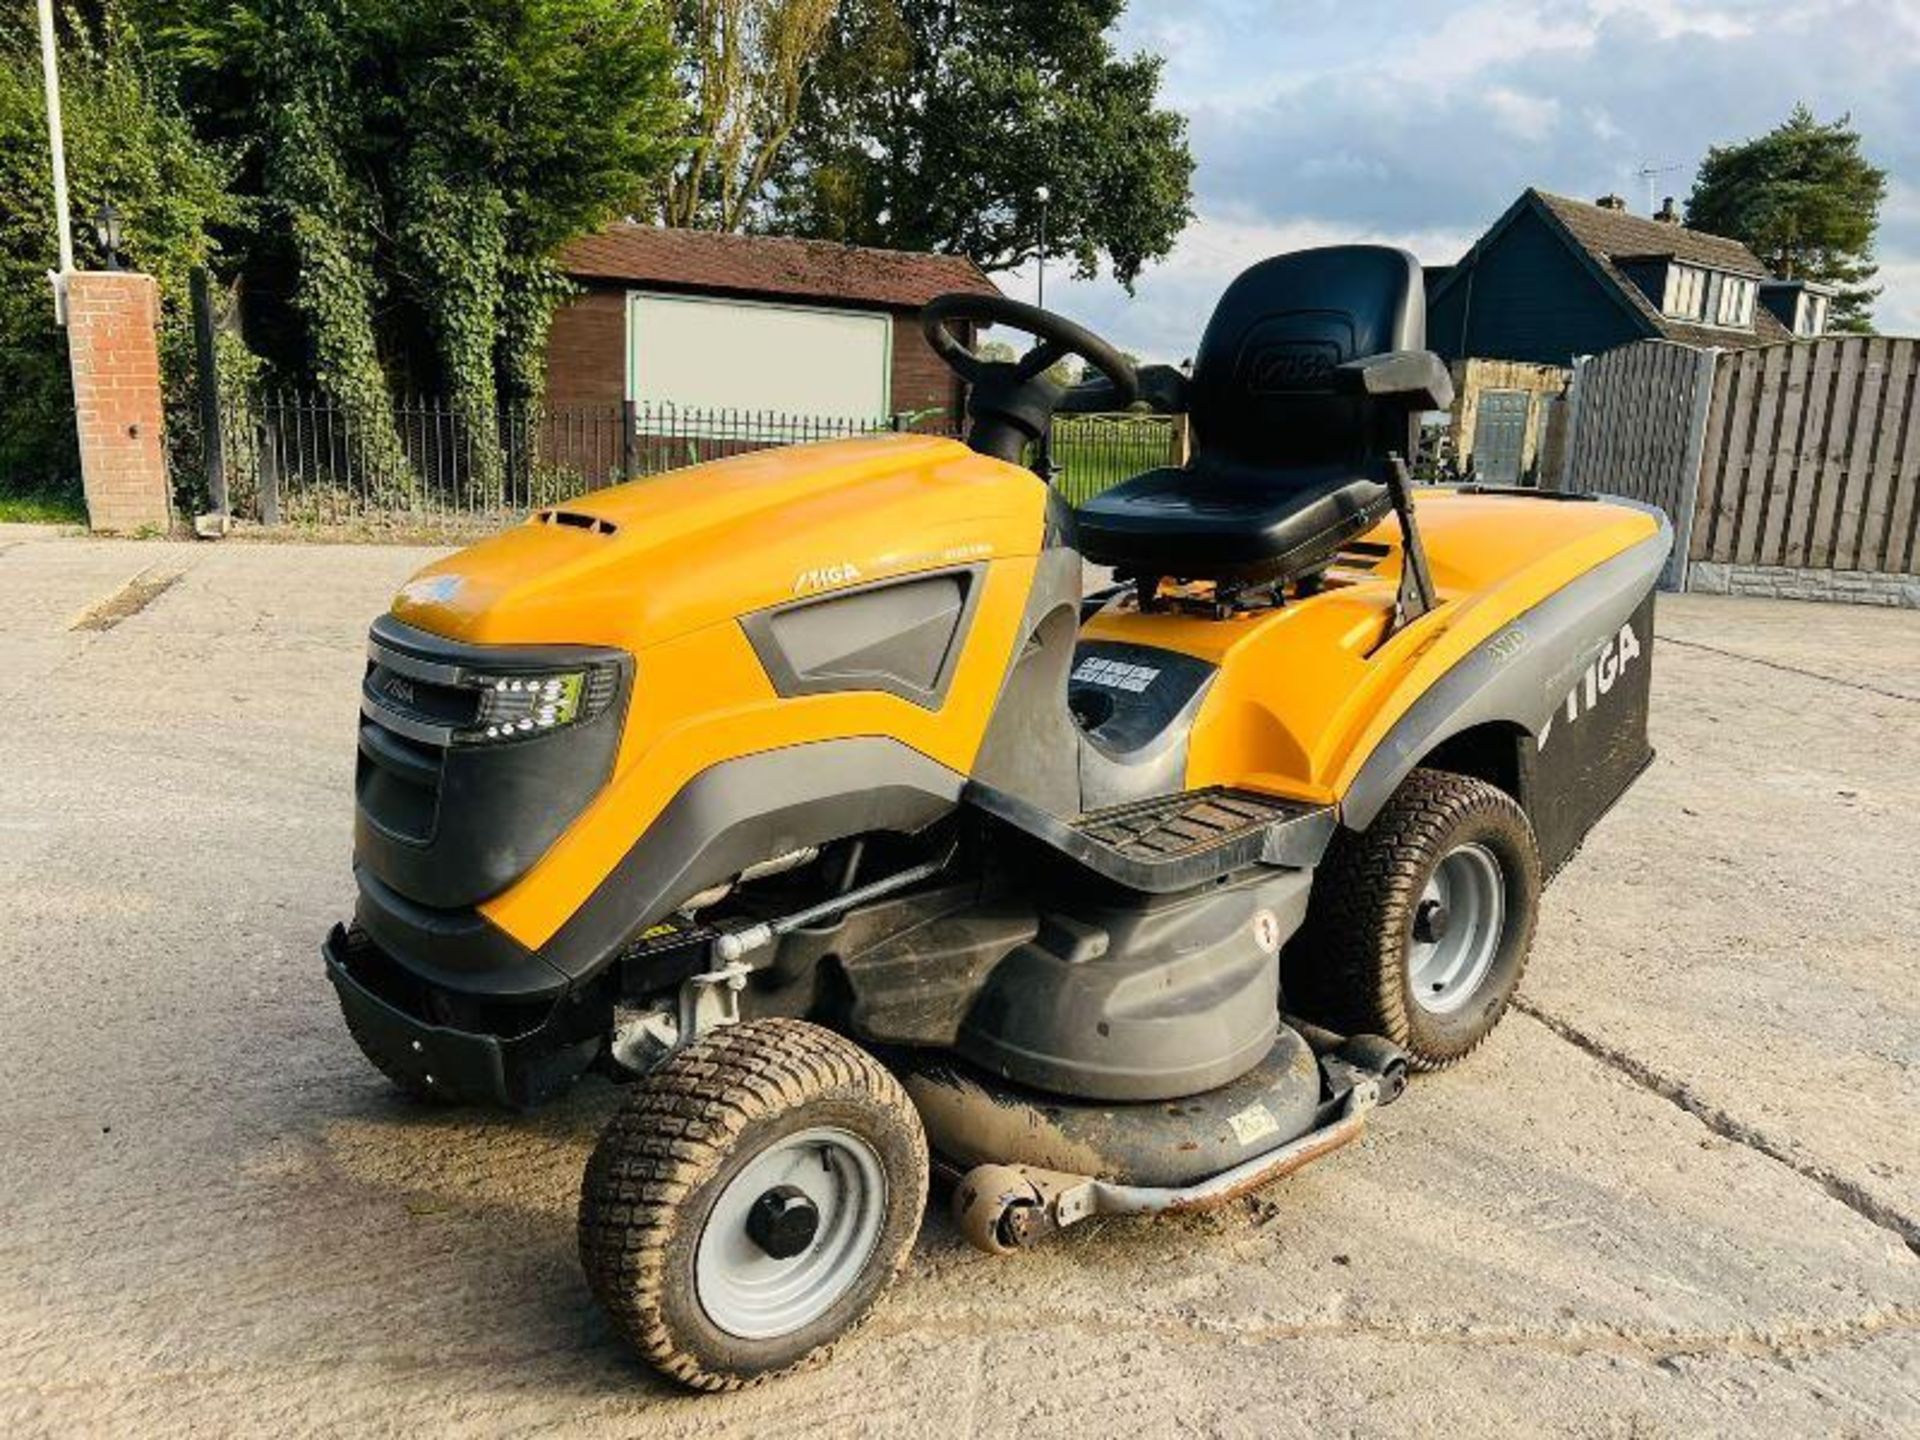 STIGA 4WD RIDE ON MOWER *YEAR 2016, 240 HOURS* C/W COLLECTION BOX.